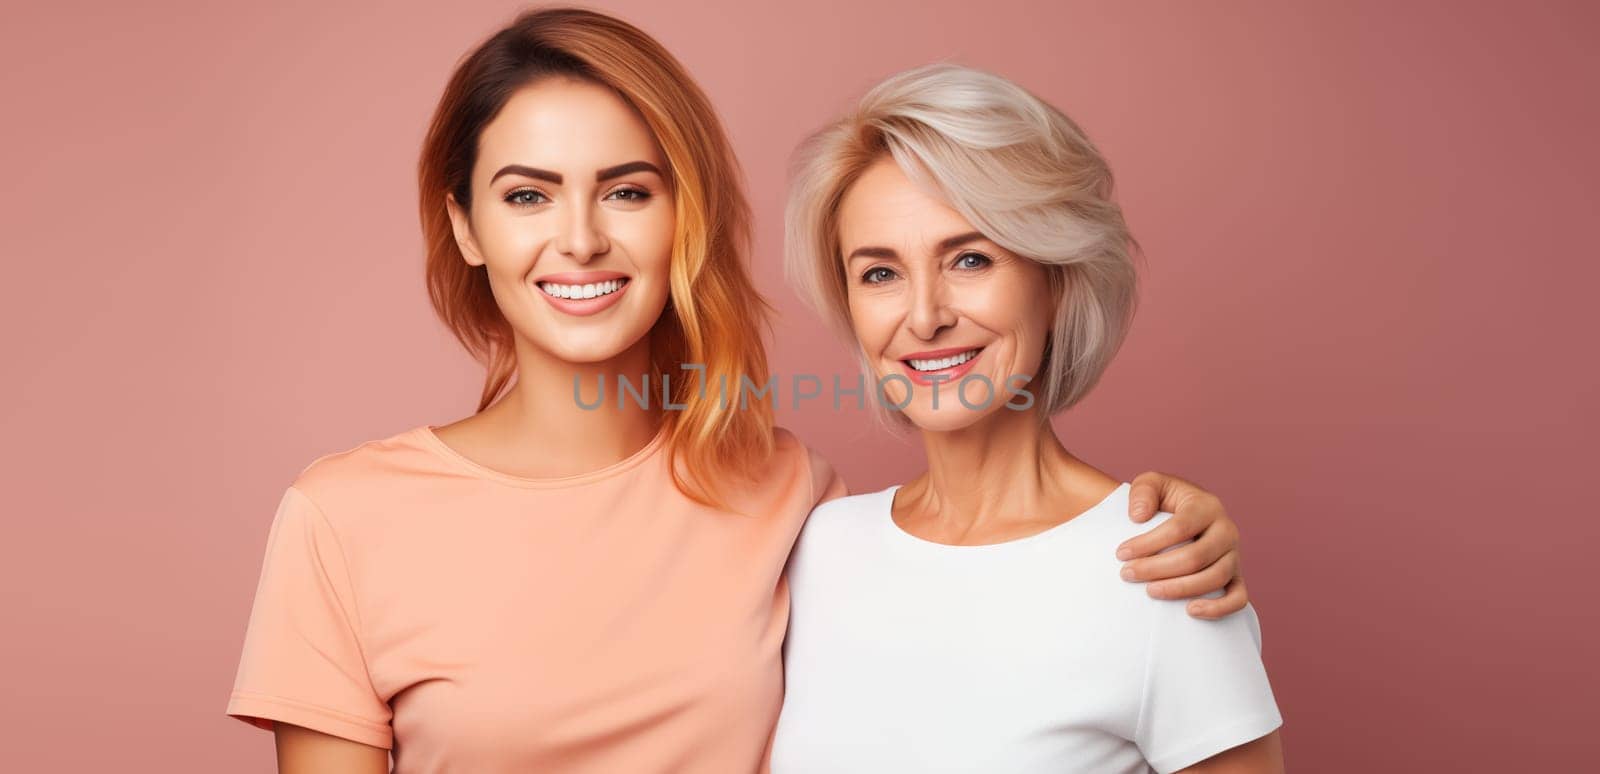 Portrait of happy smiling mature mother and adult daughter, two women together looking at camera on studio background